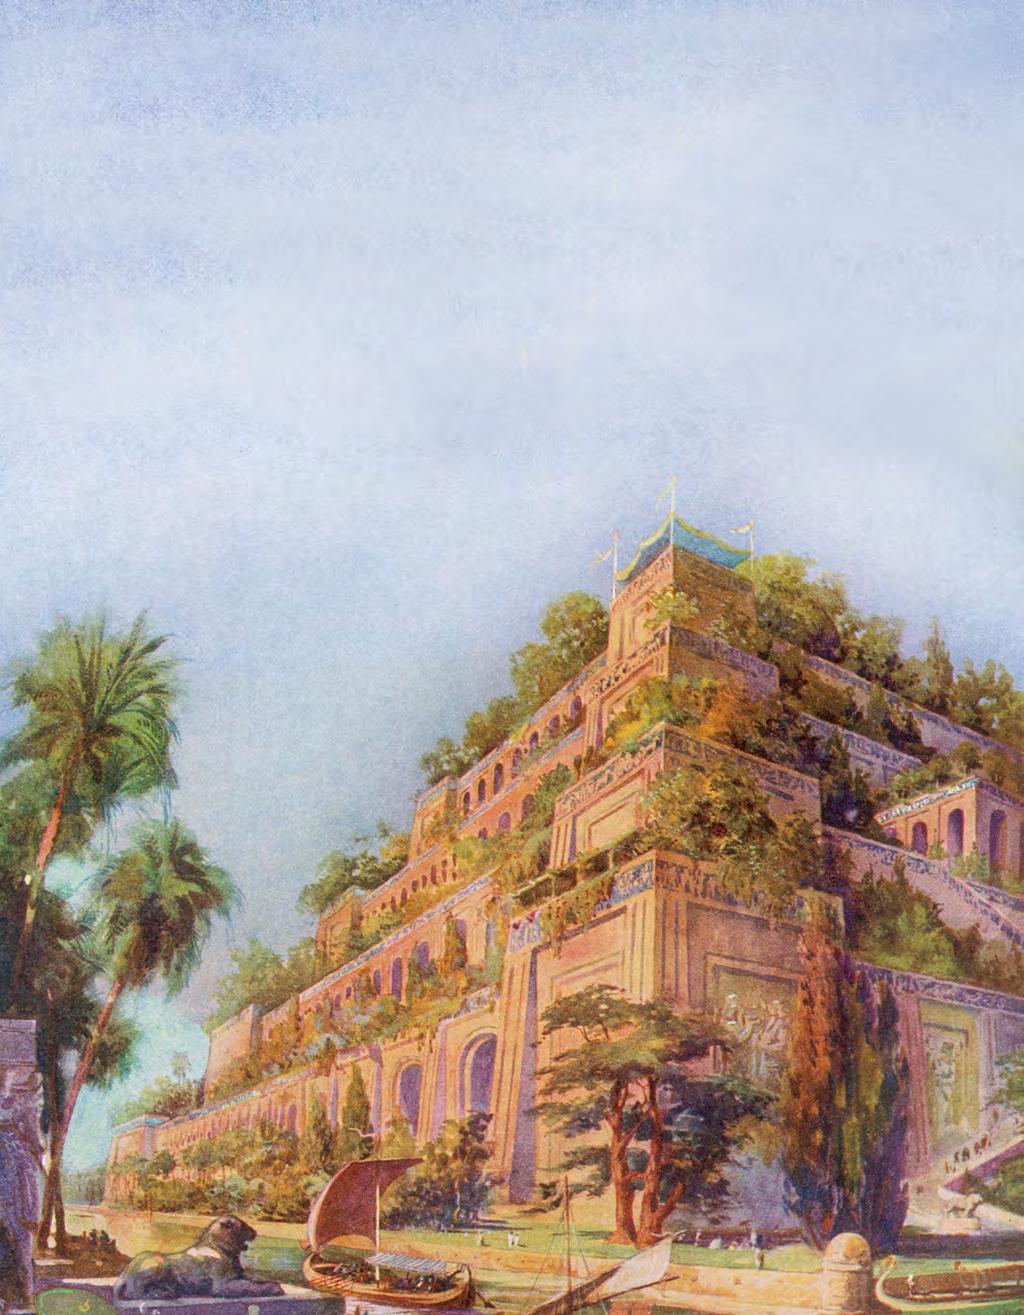 Hanging Gardens of Babylon The Hanging Gardens of Babylon still inspire curiosity and questions. A popular story is that a king created them to cheer up his homesick wife.